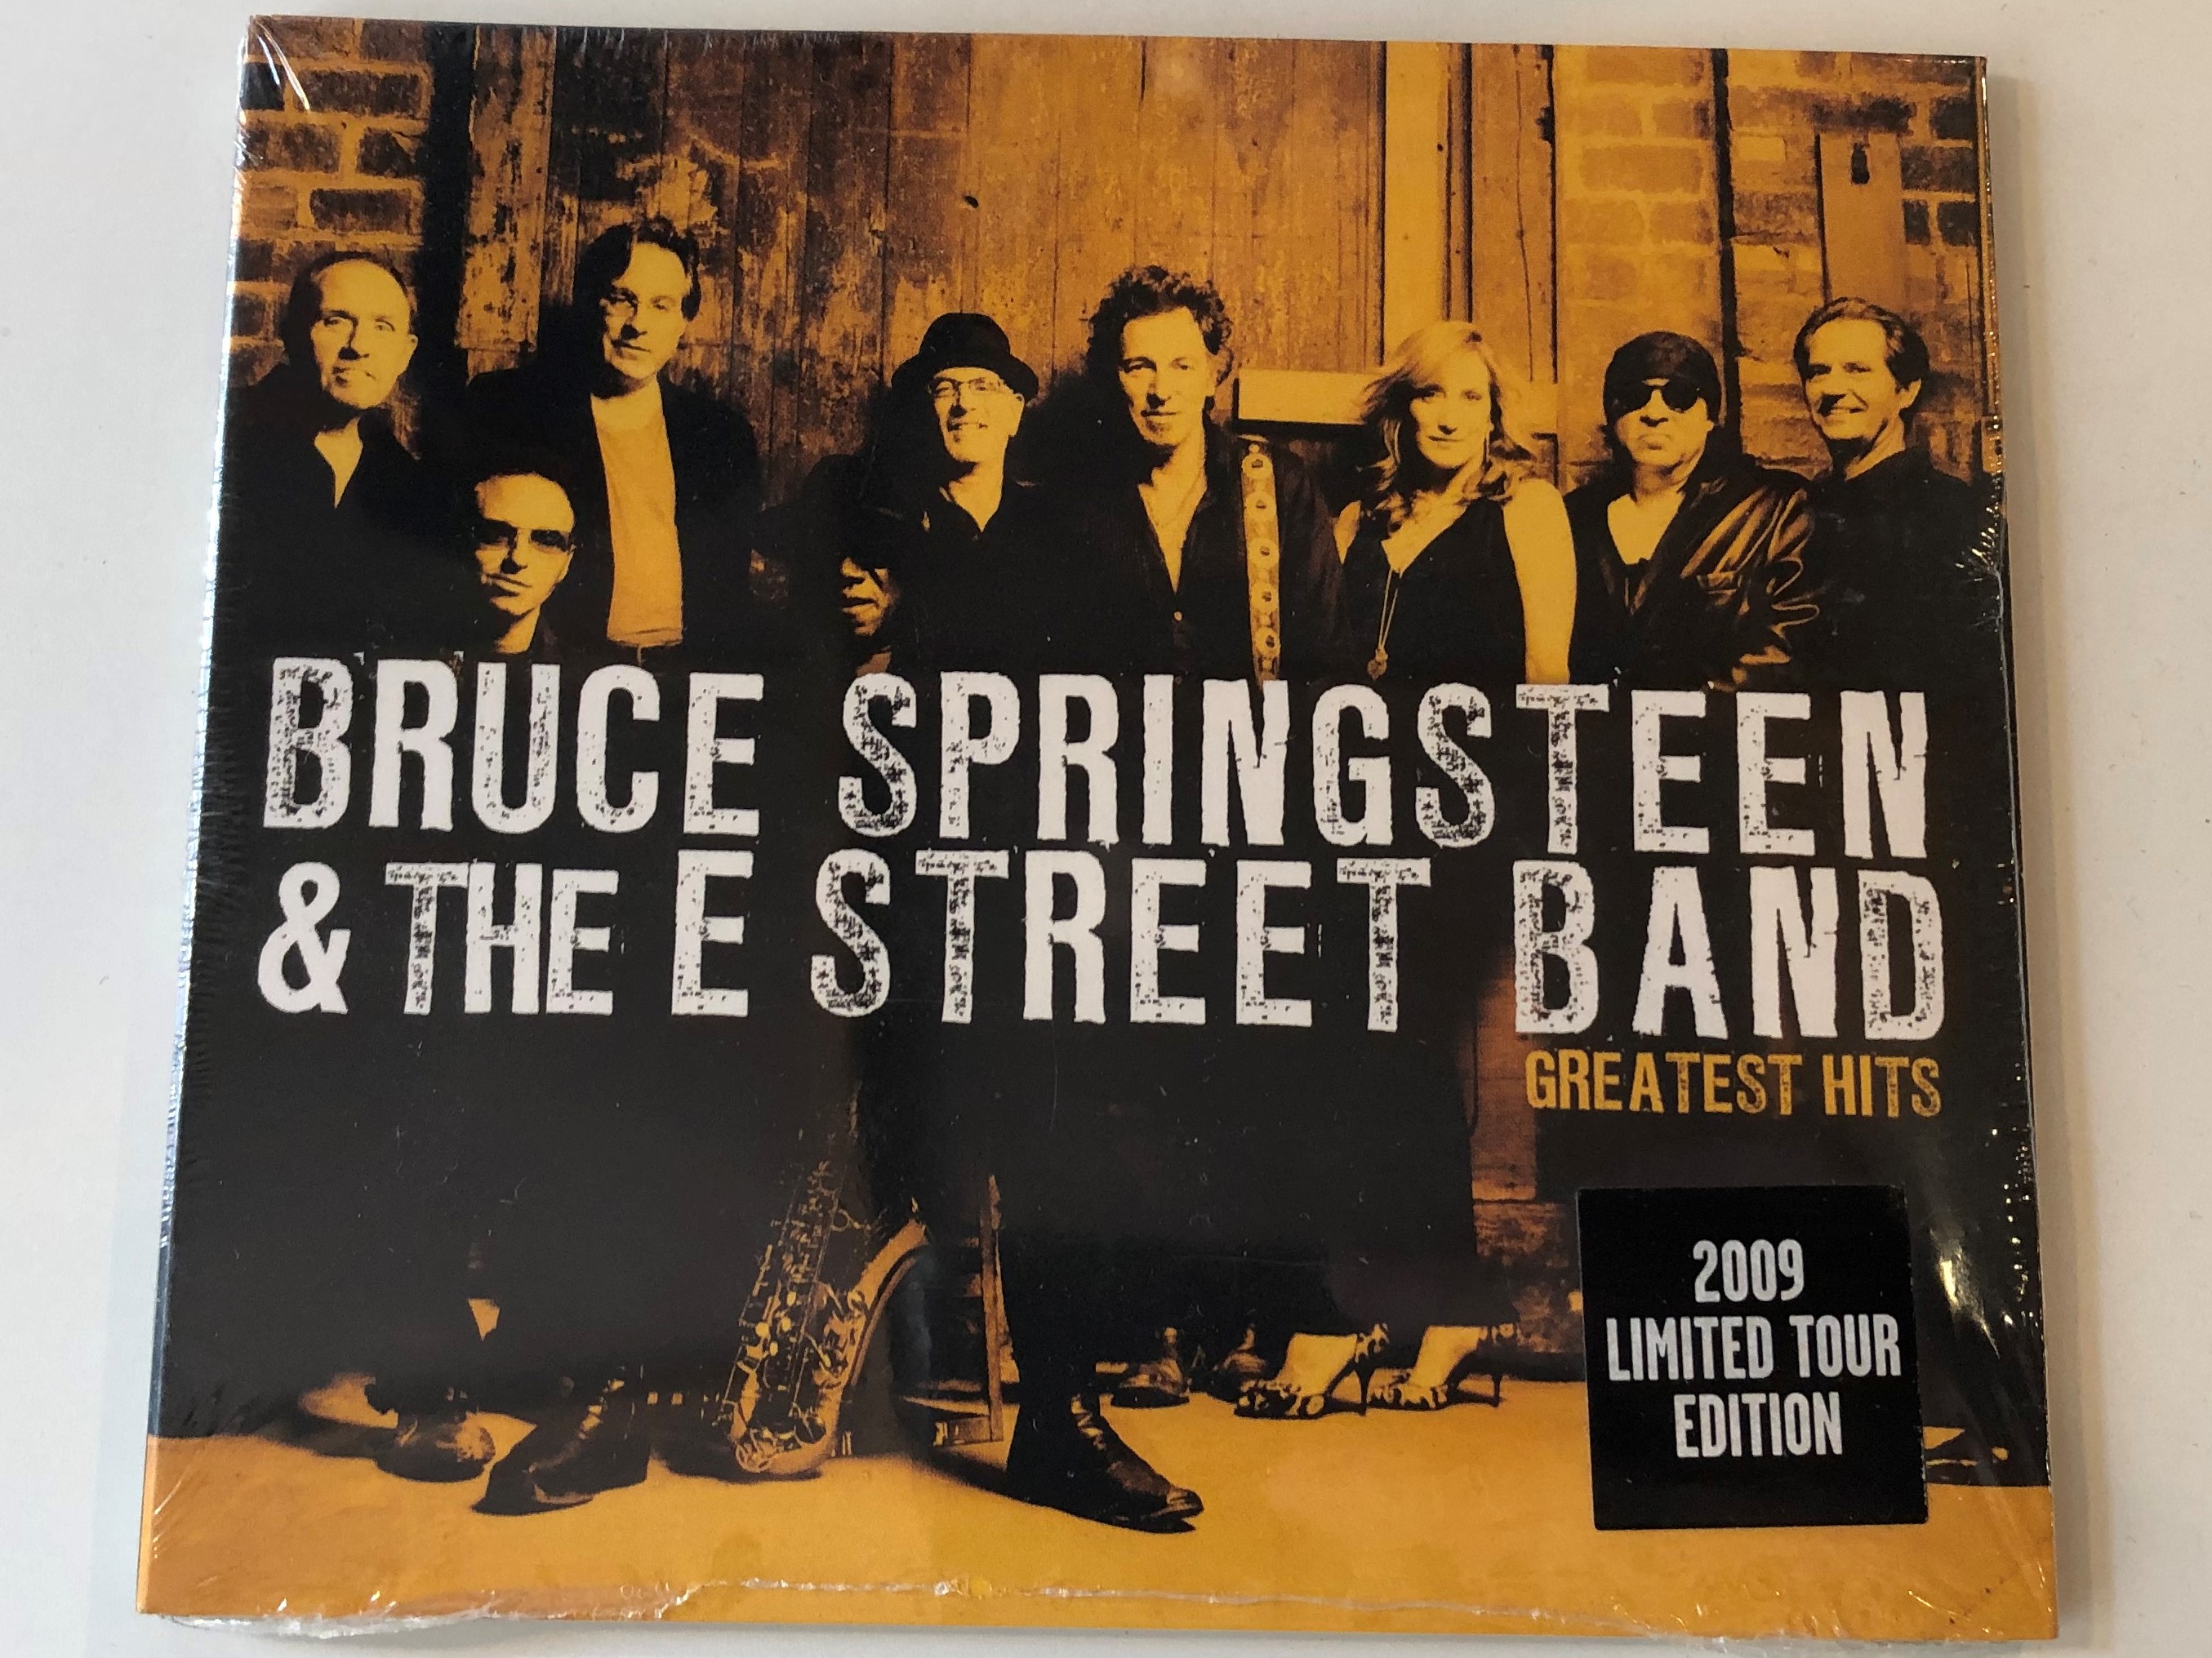 bruce-springsteen-the-e-street-band-greatest-hits-2009-limited-tour-edition-sony-music-audio-cd-2009-88697532812-1-.jpg